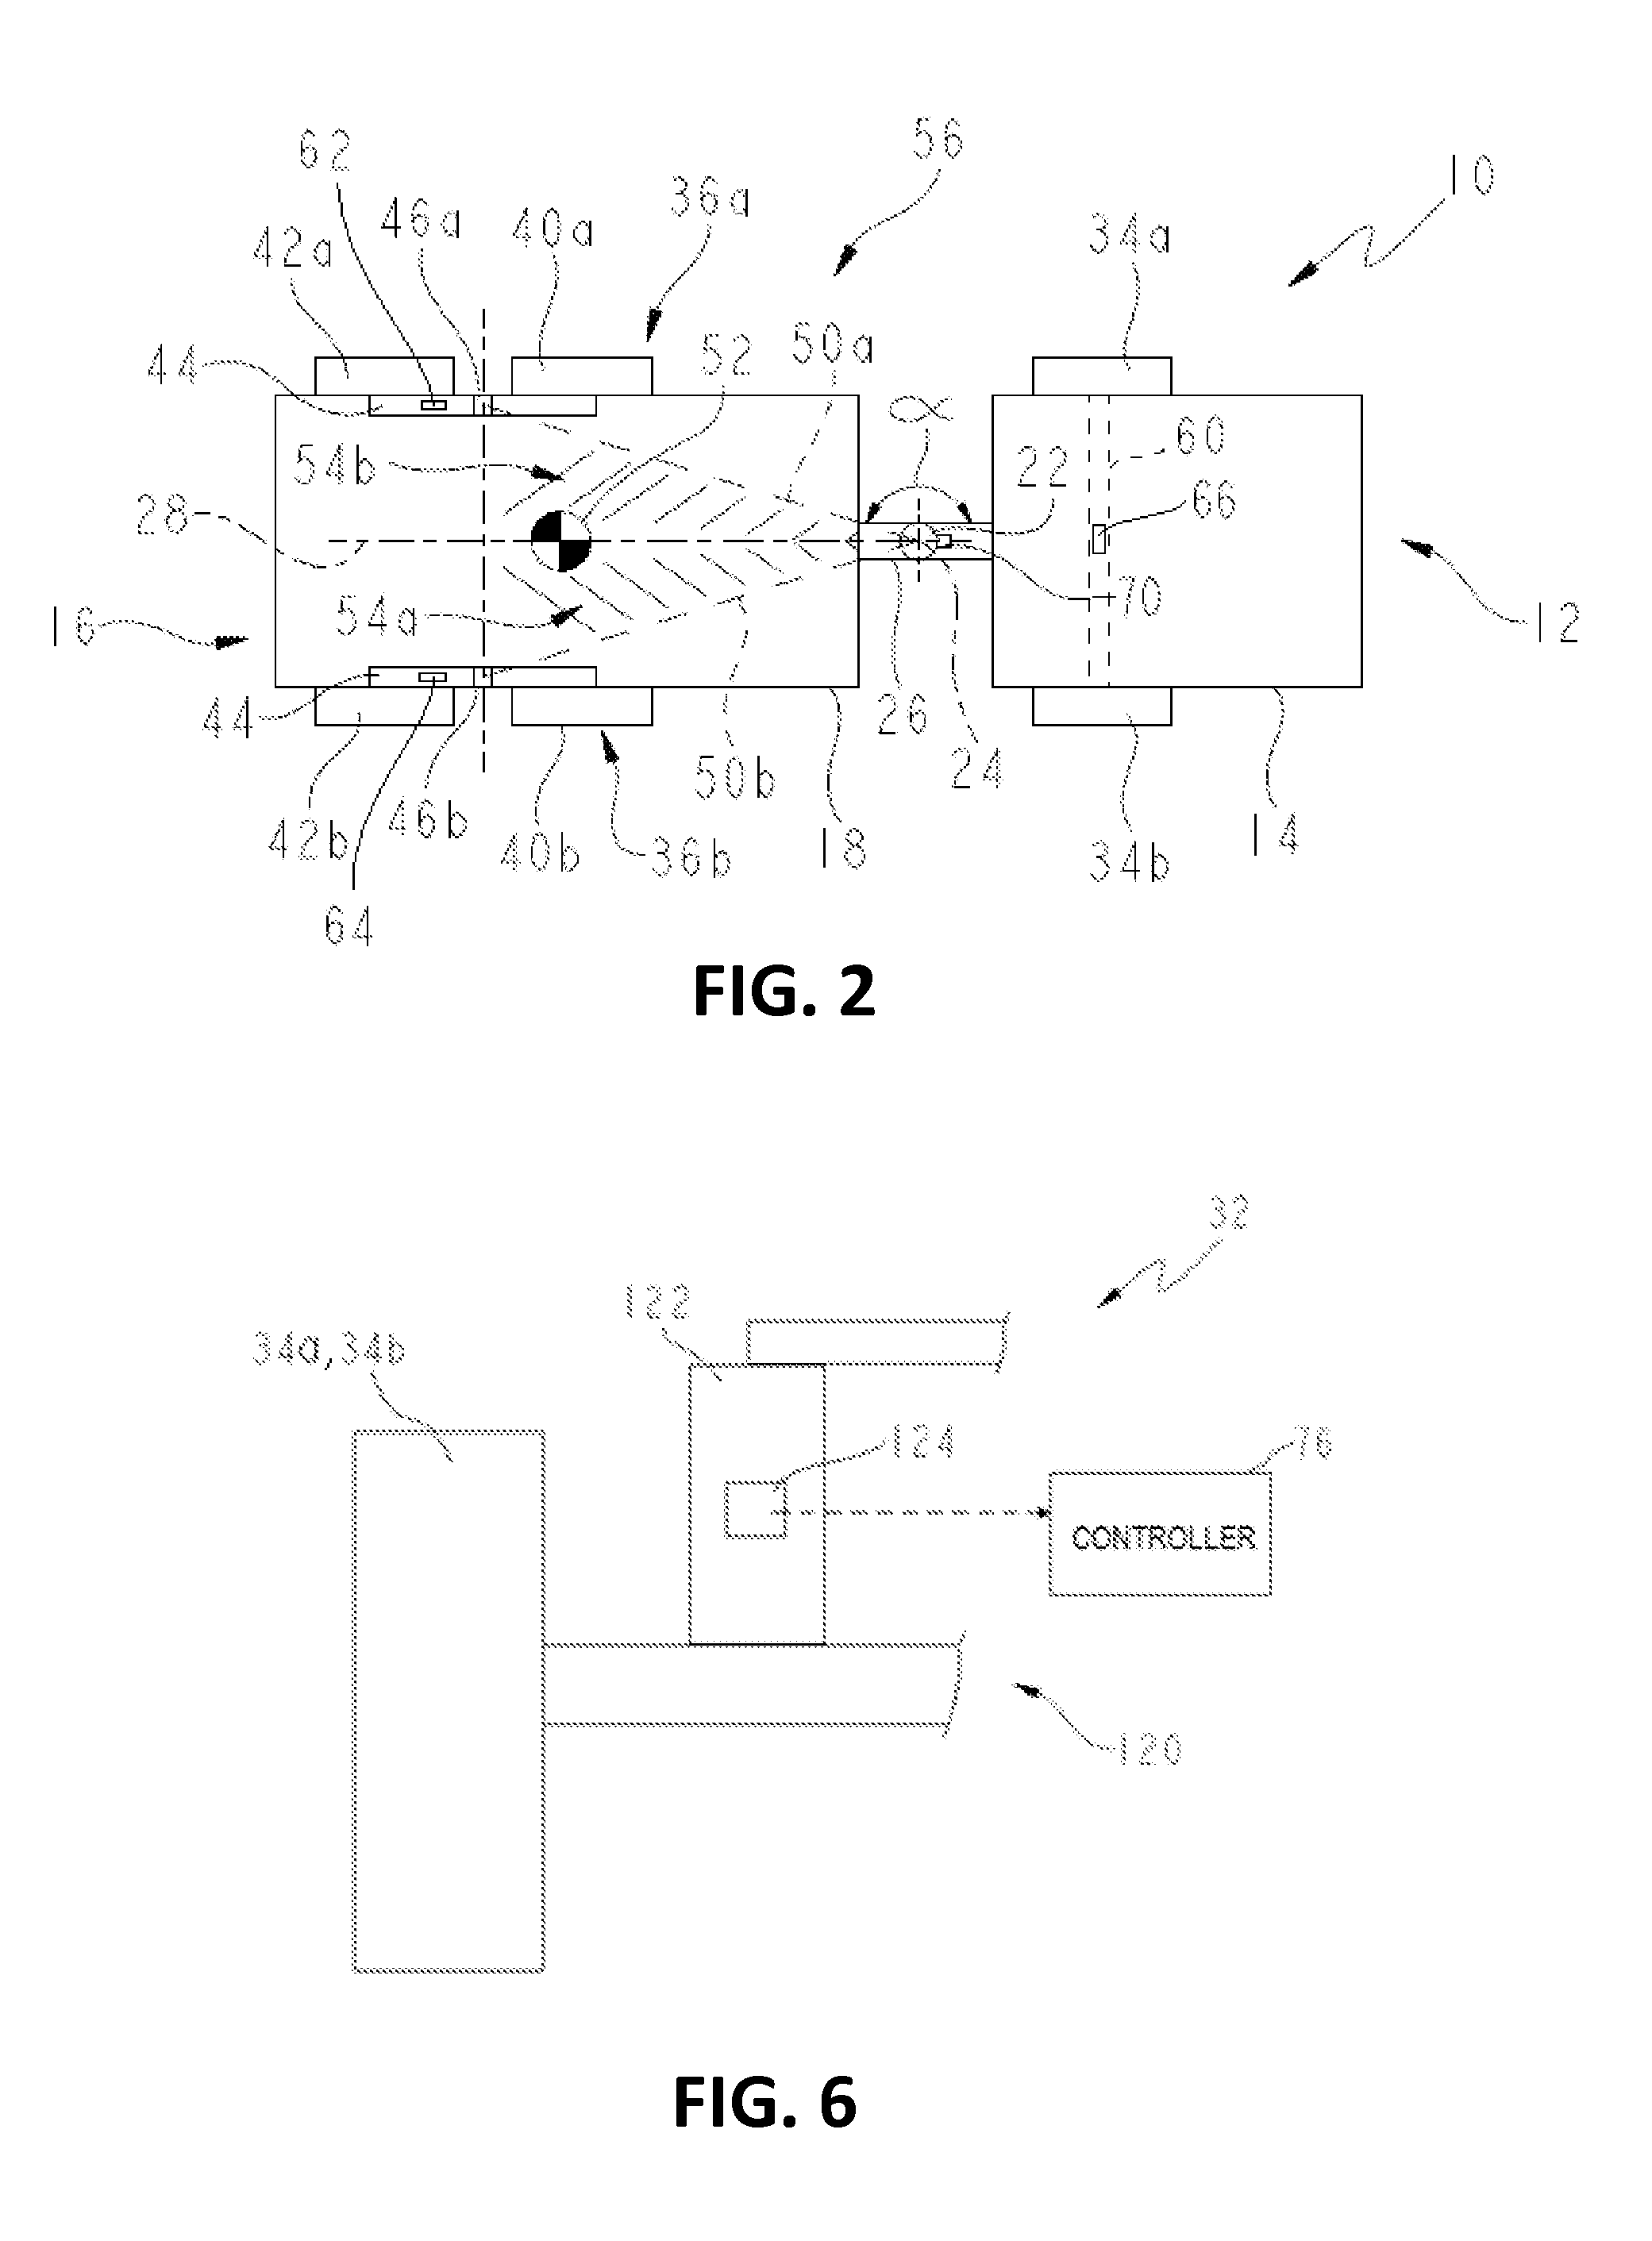 Weight-based stability detection system